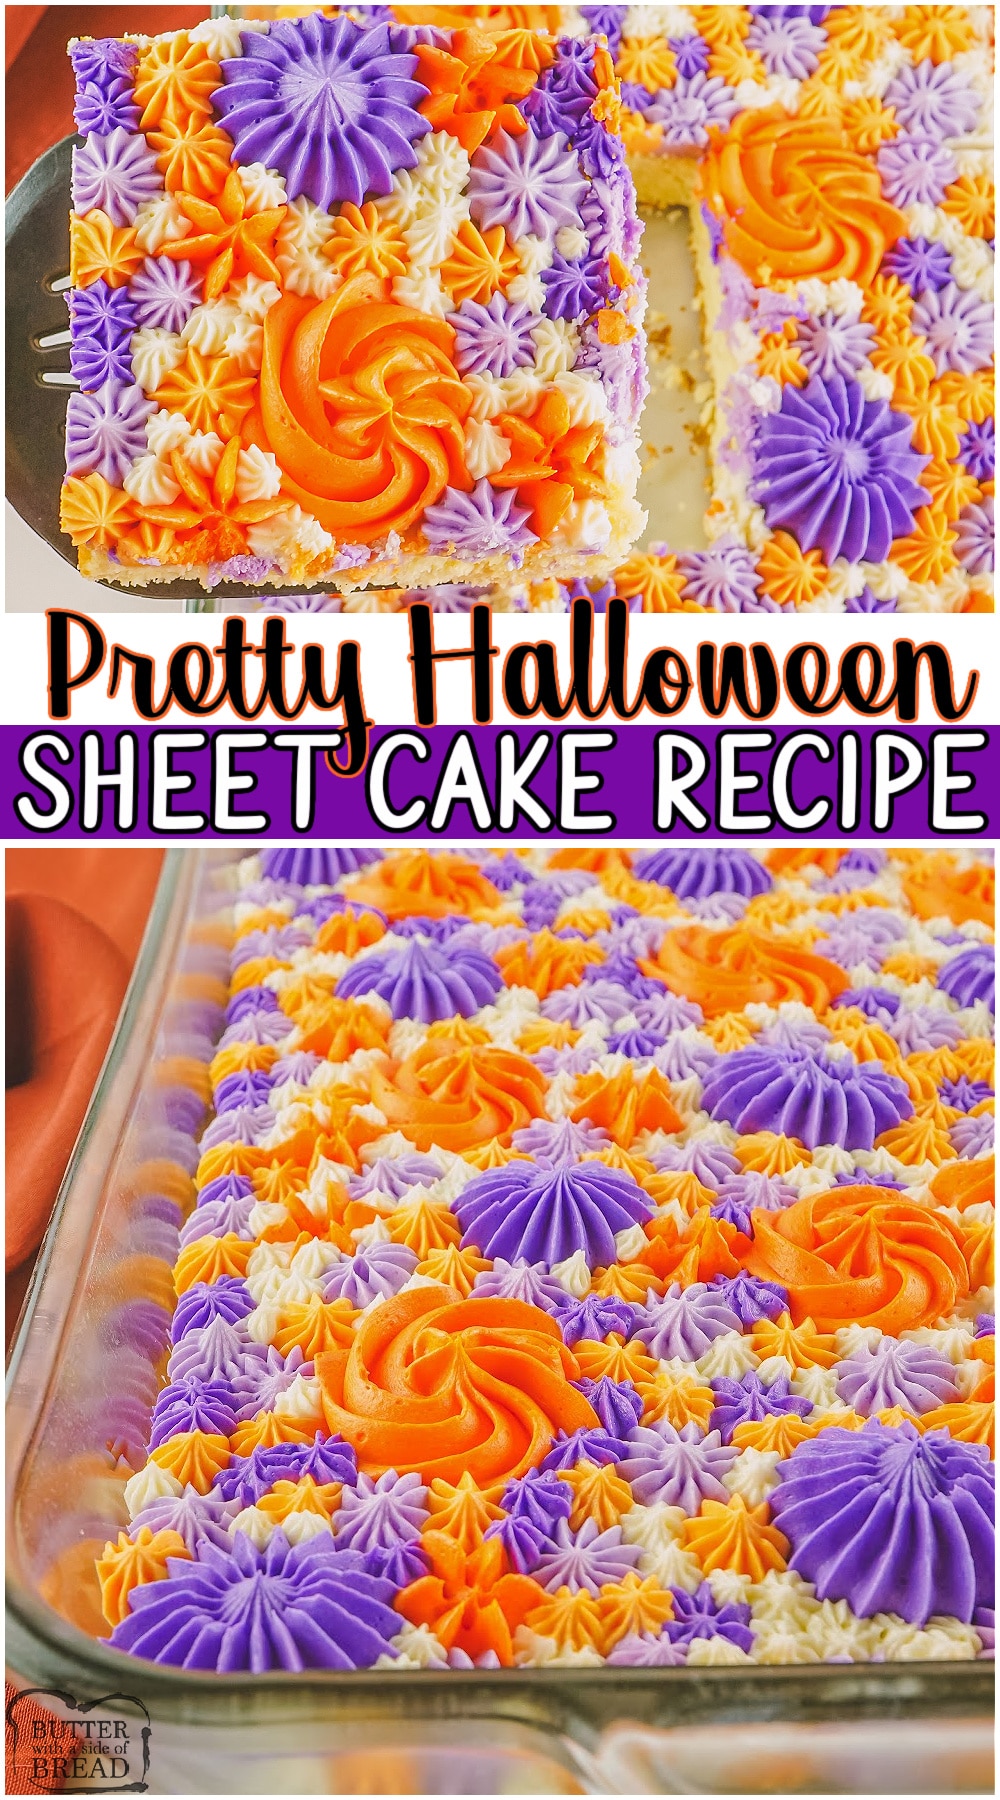 Pretty Halloween Sheet Cake recipe made from scratch with classic vanilla cake and buttercream frosting! Easy instructions for piping a pretty cake with Halloween colors. #Halloween #cake #sheetcake #piping #dessert from BUTTER WITH A SIDE OF BREAD